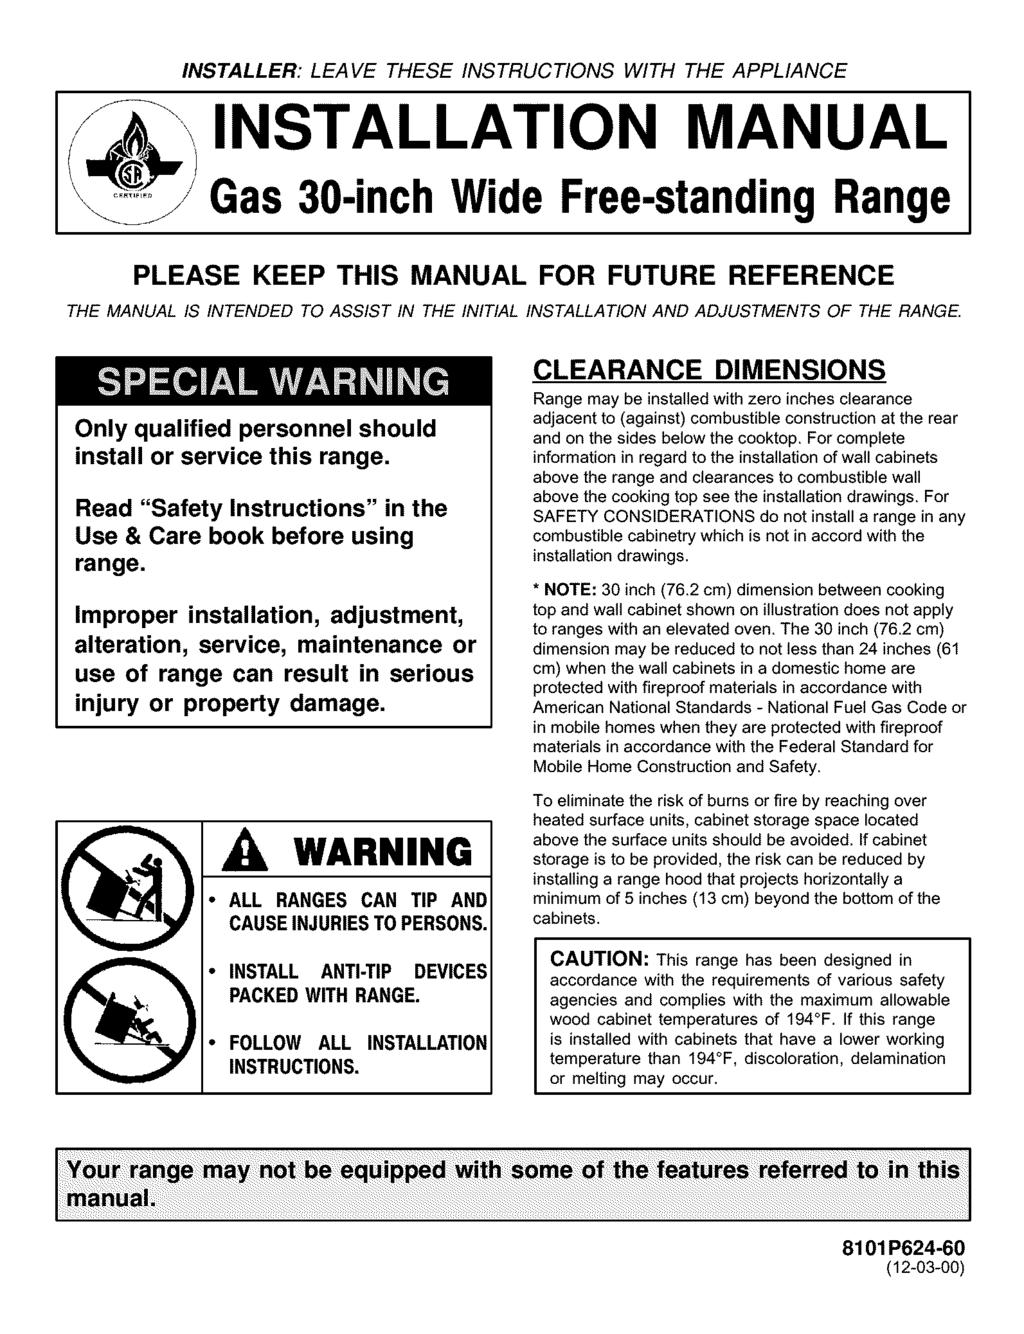 INSTALLER: LEAVE THESE INSTRUCTIONS WITH THE APPLIANCE INSTALLATION MANUAL 'Gas 30-inch Wide Free-standingRange PLEASE KEEP THIS MANUAL FOR FUTURE REFERENCE THE MANUAL IS INTENDED TO ASSIST IN THE